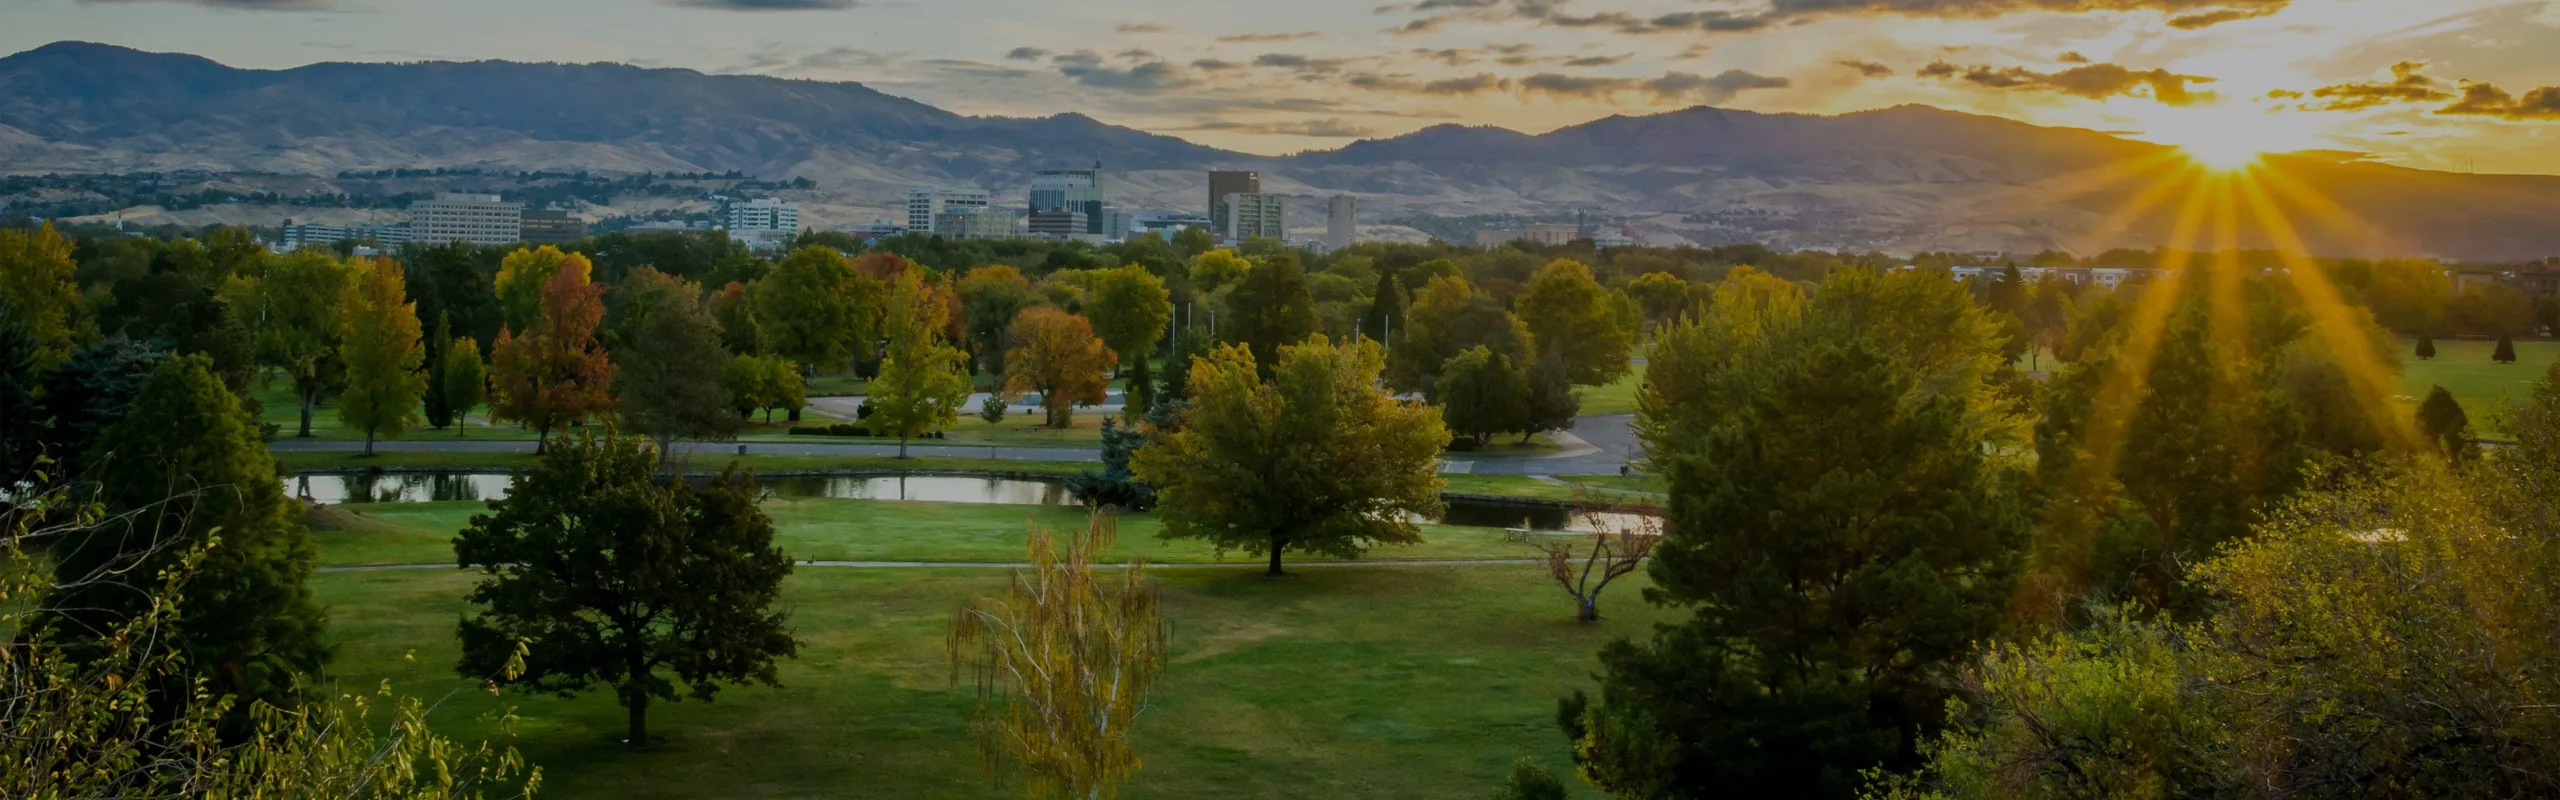 Boise, Idaho Office: Announcing Our Brand New Location